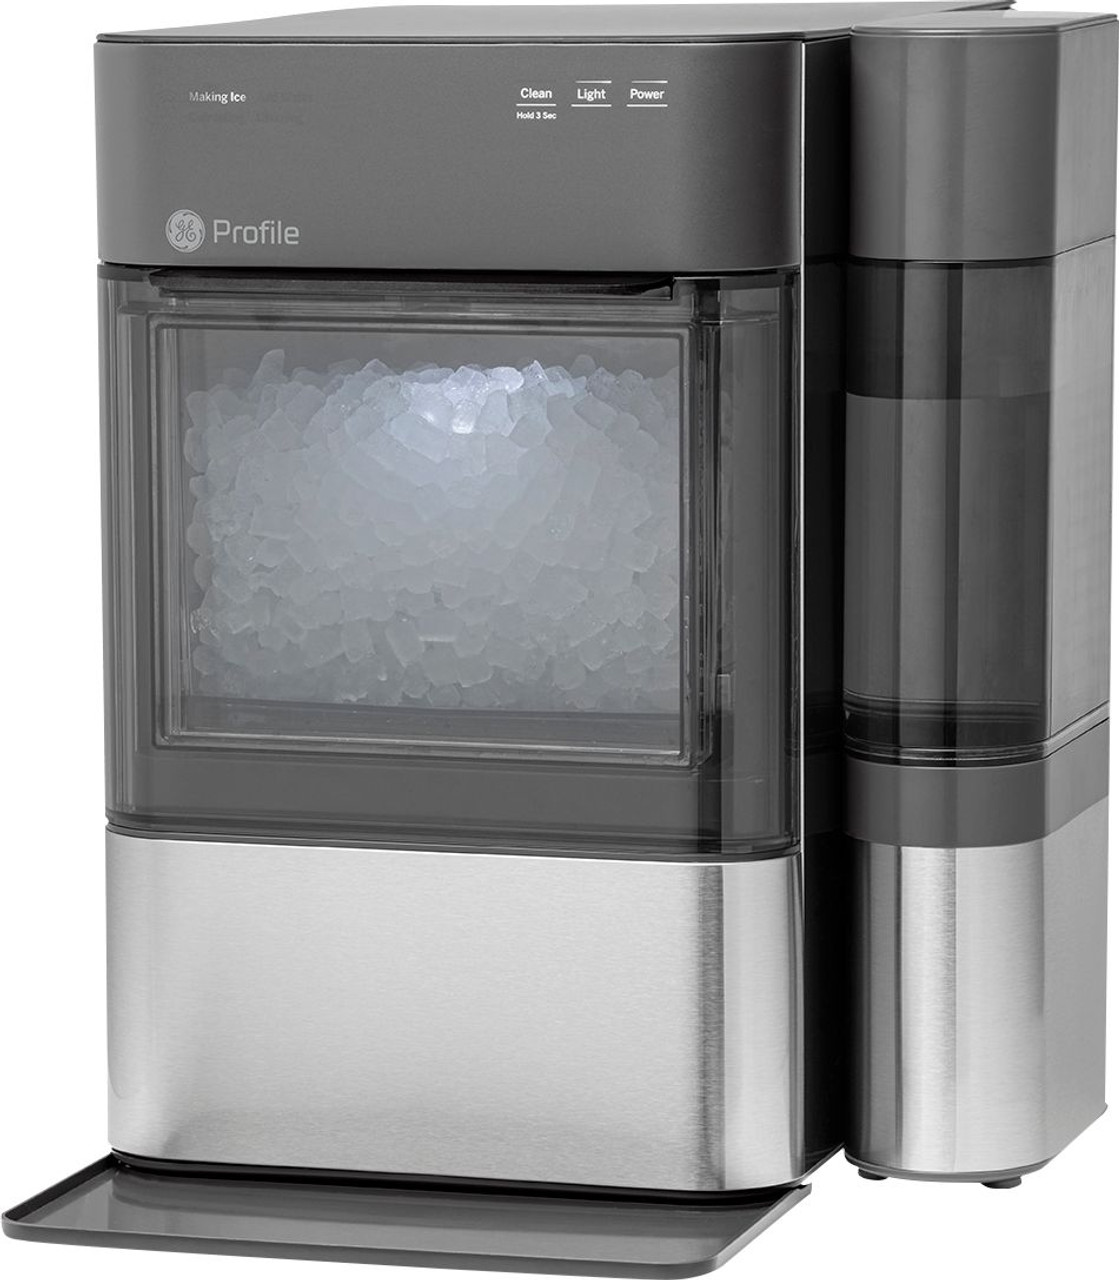 GE Profile - Opal 24-Lb. Portable Icemaker with Wifi - Stainless steel